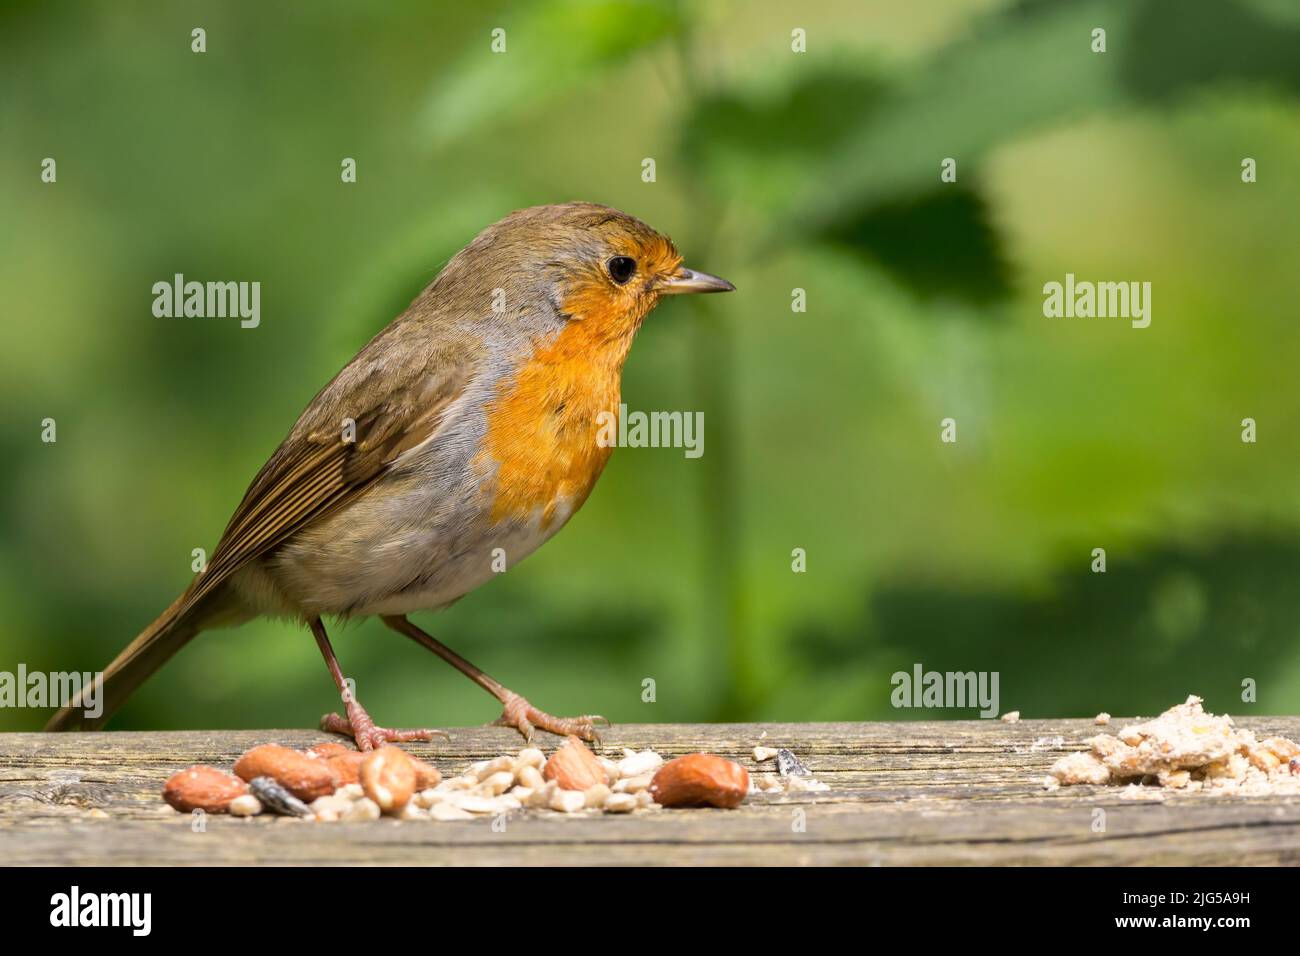 Robin (erithacus rubecula) on fence rail with bird food, Brown back red orange breast and face with blue grey nape flanks and underside copy space Stock Photo